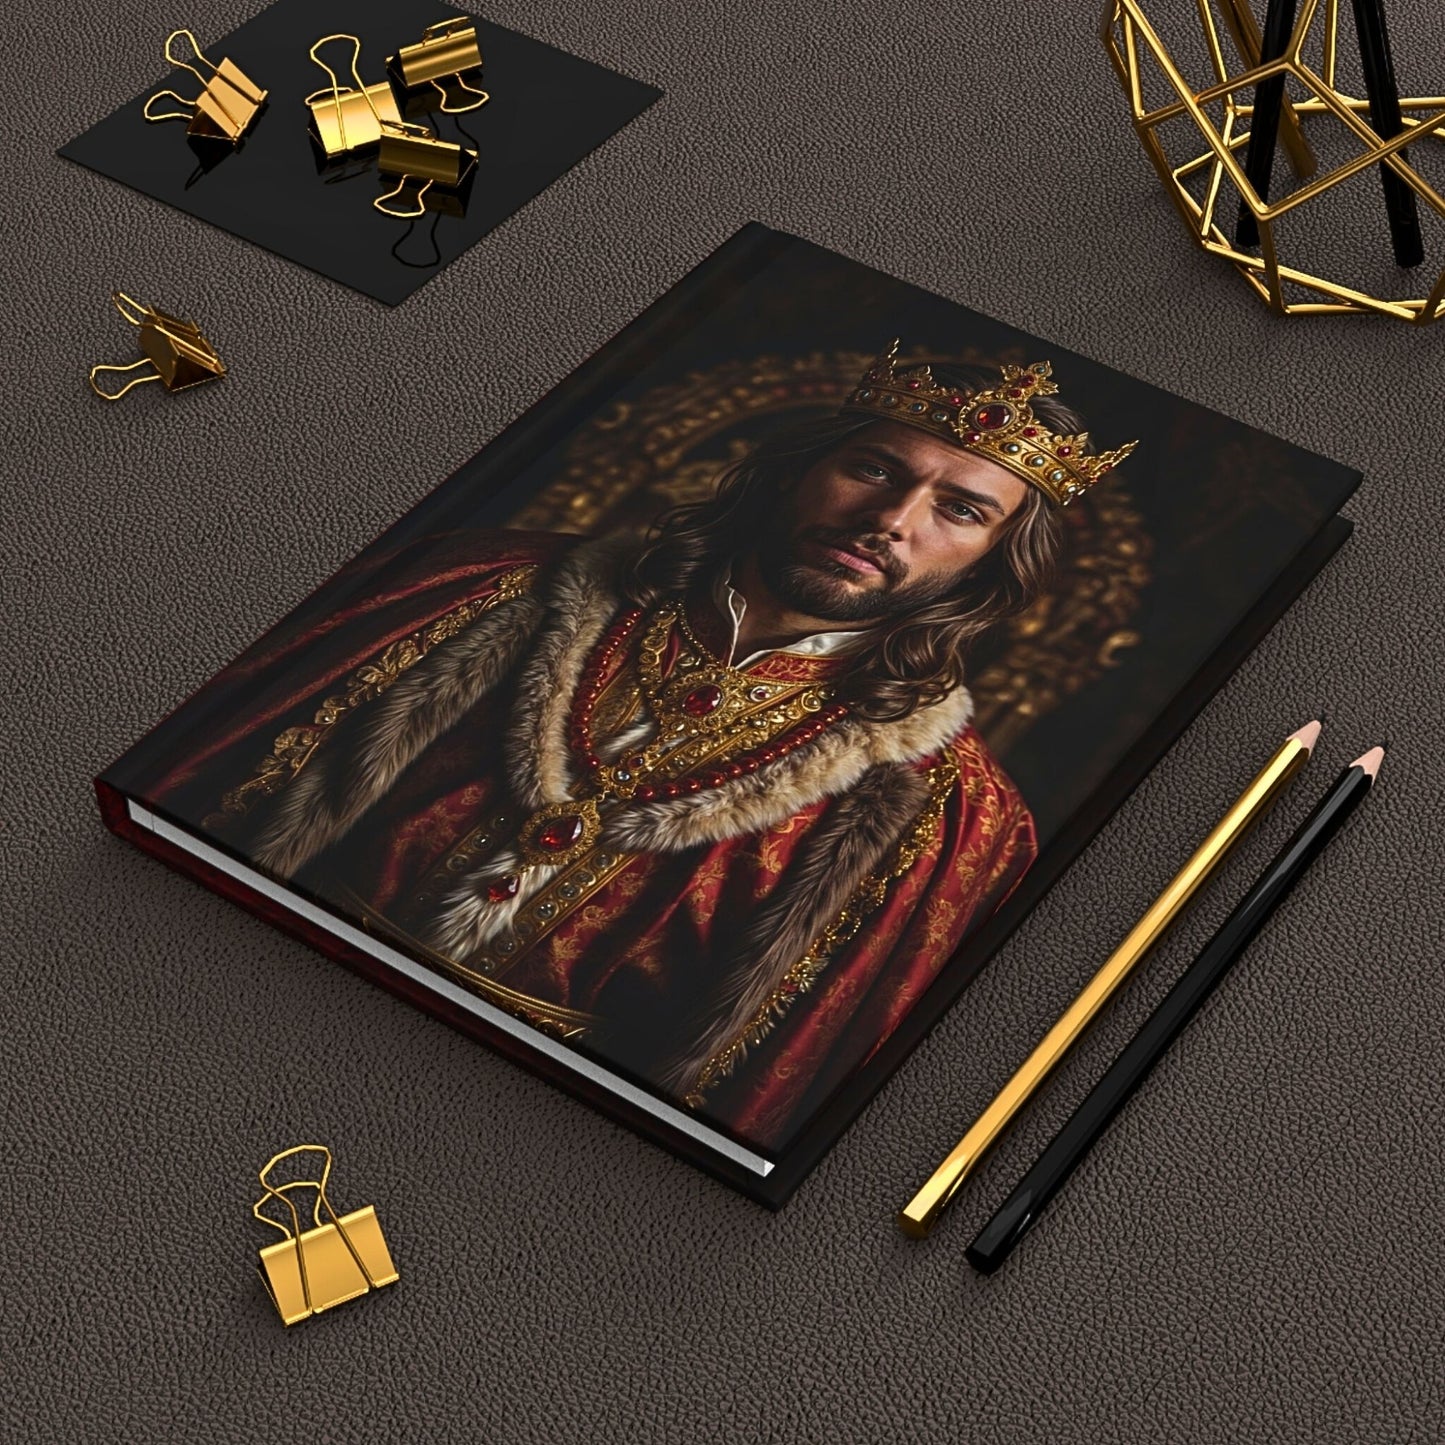 Custom Journal from Photo, Personalized King Journal - Birthday Gift for Him. A15.9